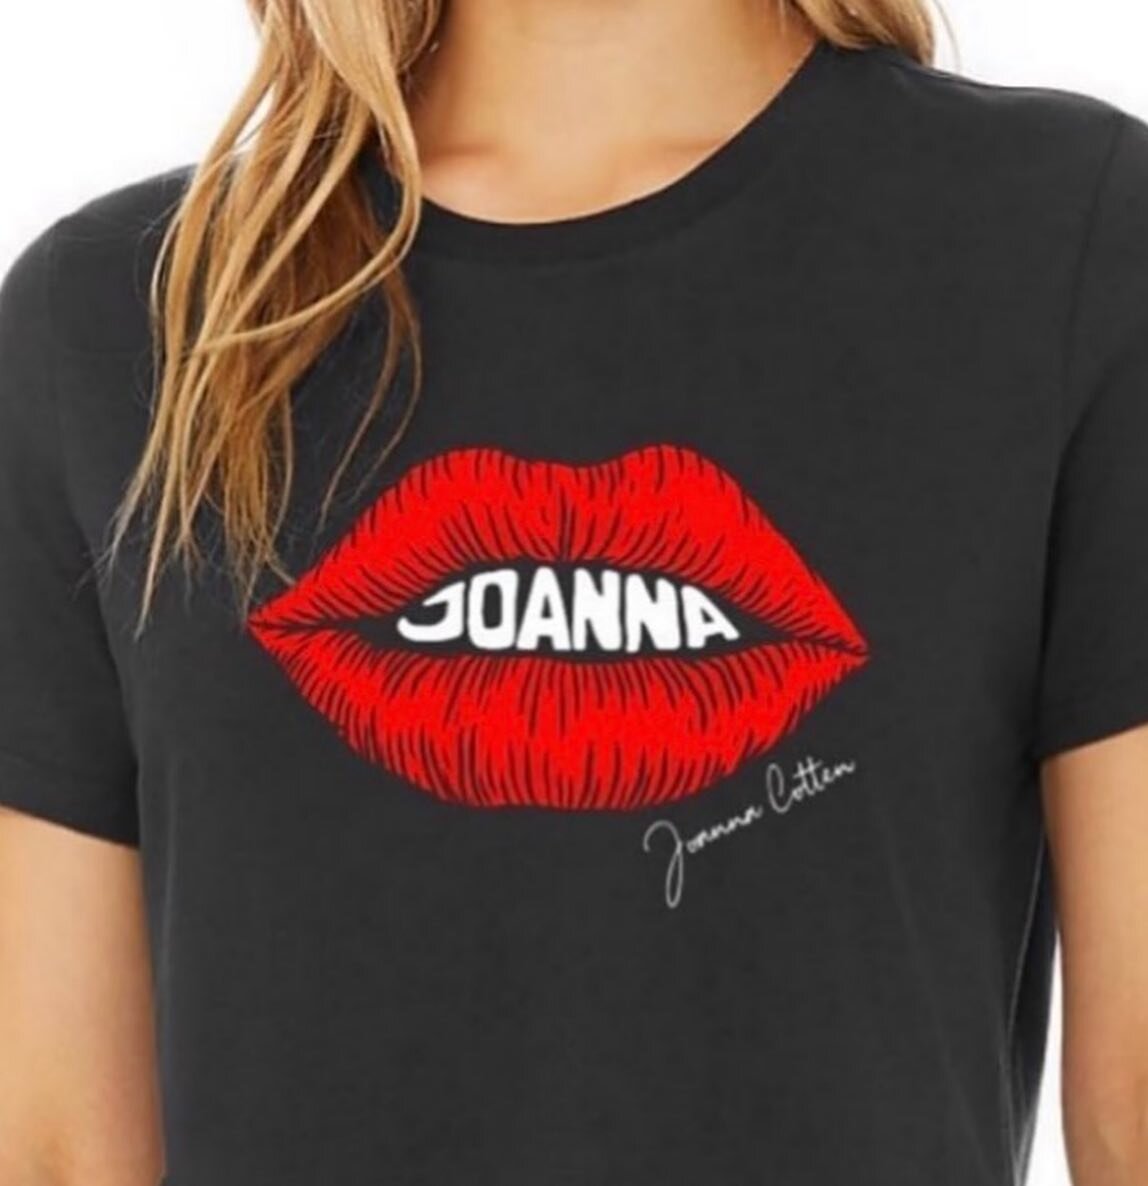 💋TONIGHT💋The lips shirt is in the main entrance and 107 stand! And if you aren&rsquo;t at the show, you can pick up a Rock N Roll hand shirt 🤘🏽including lightweight zip up hoodies for spring and tanks for summer online, link in bio! See y&rsquo;a